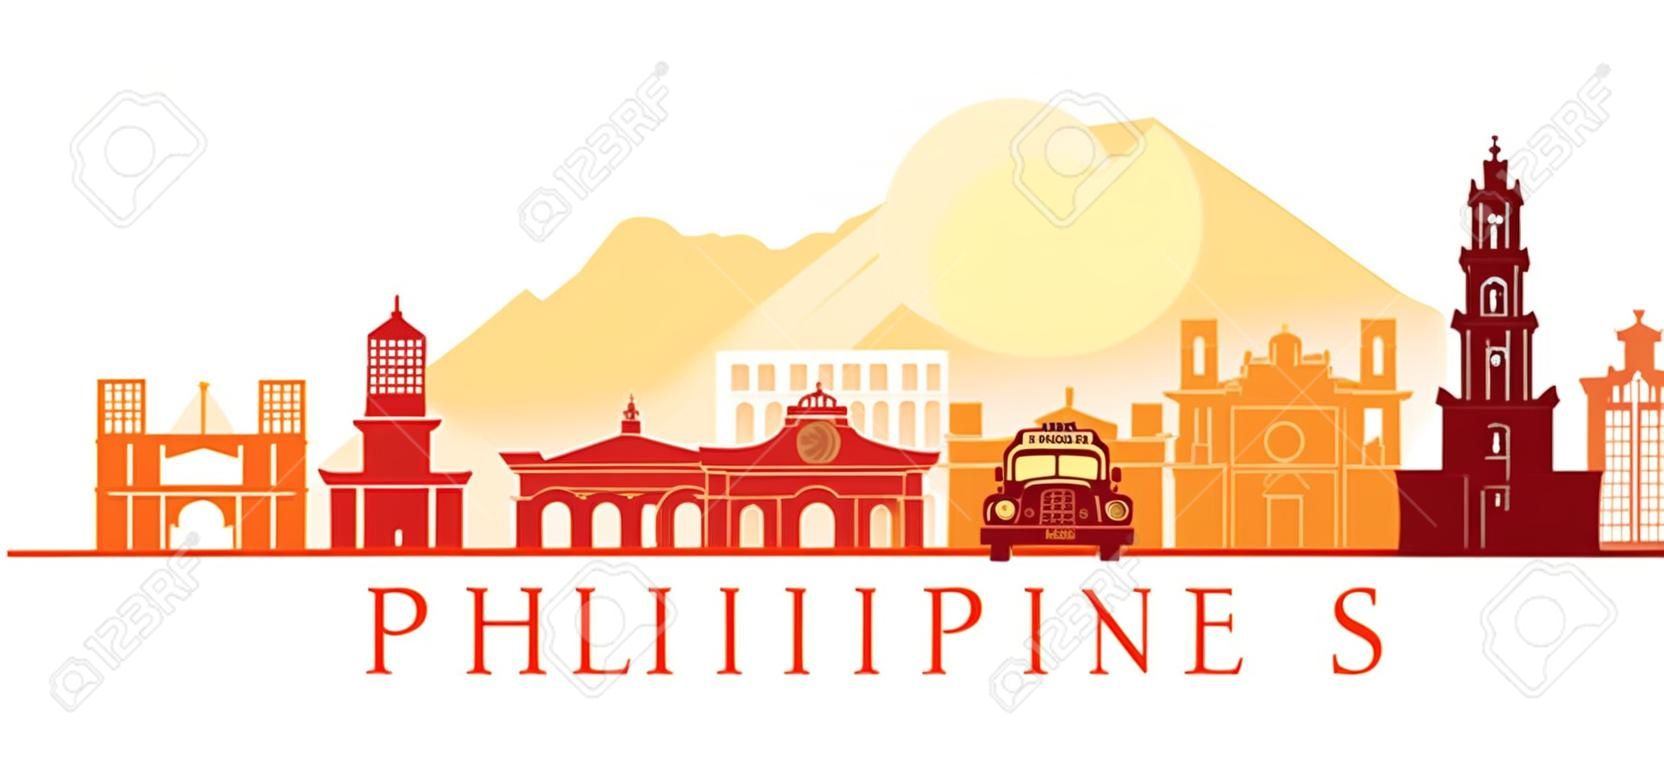 Philippines Architecture Landmarks Skyline, Shape, Cityscape, Travel and Tourist Attraction